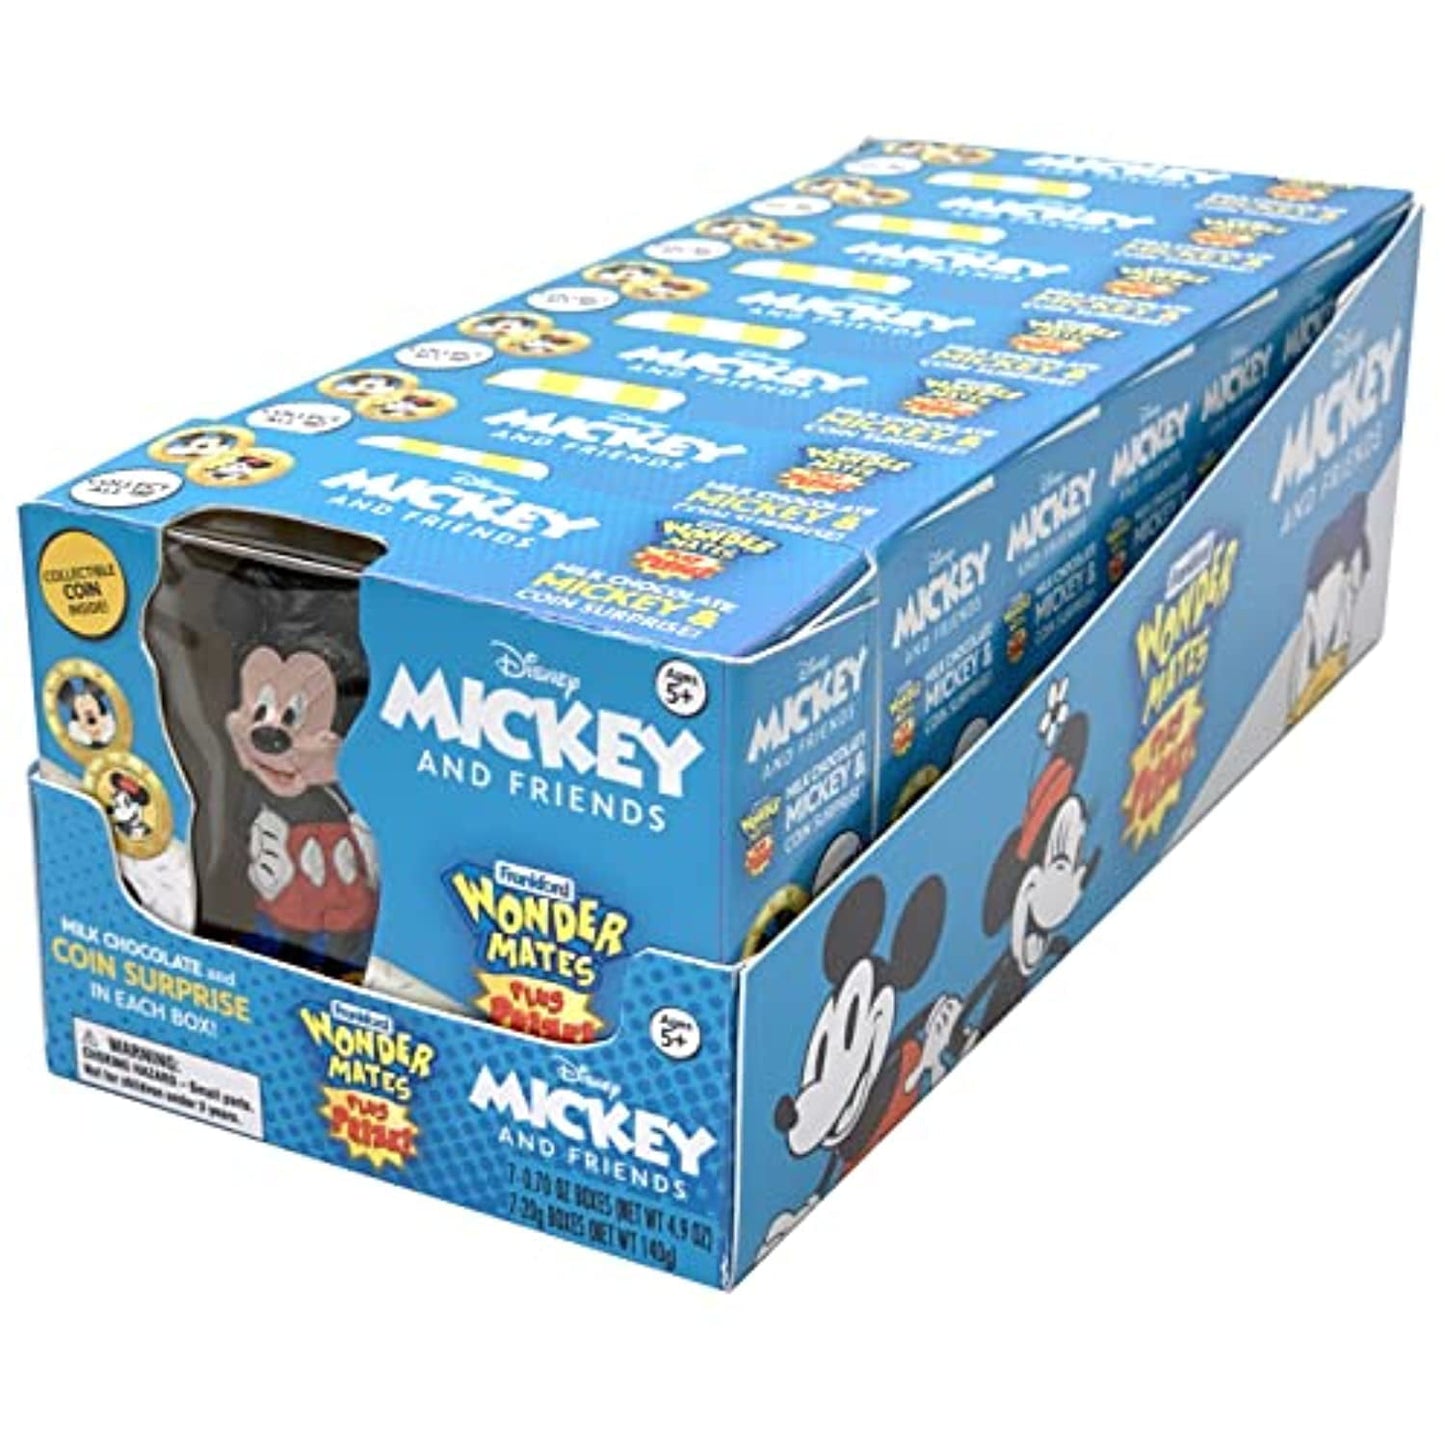 Frankford Mickey and Friends Wonder Mates Milk Chocolate Candy & Coin Surprise  .70oz - 84ct